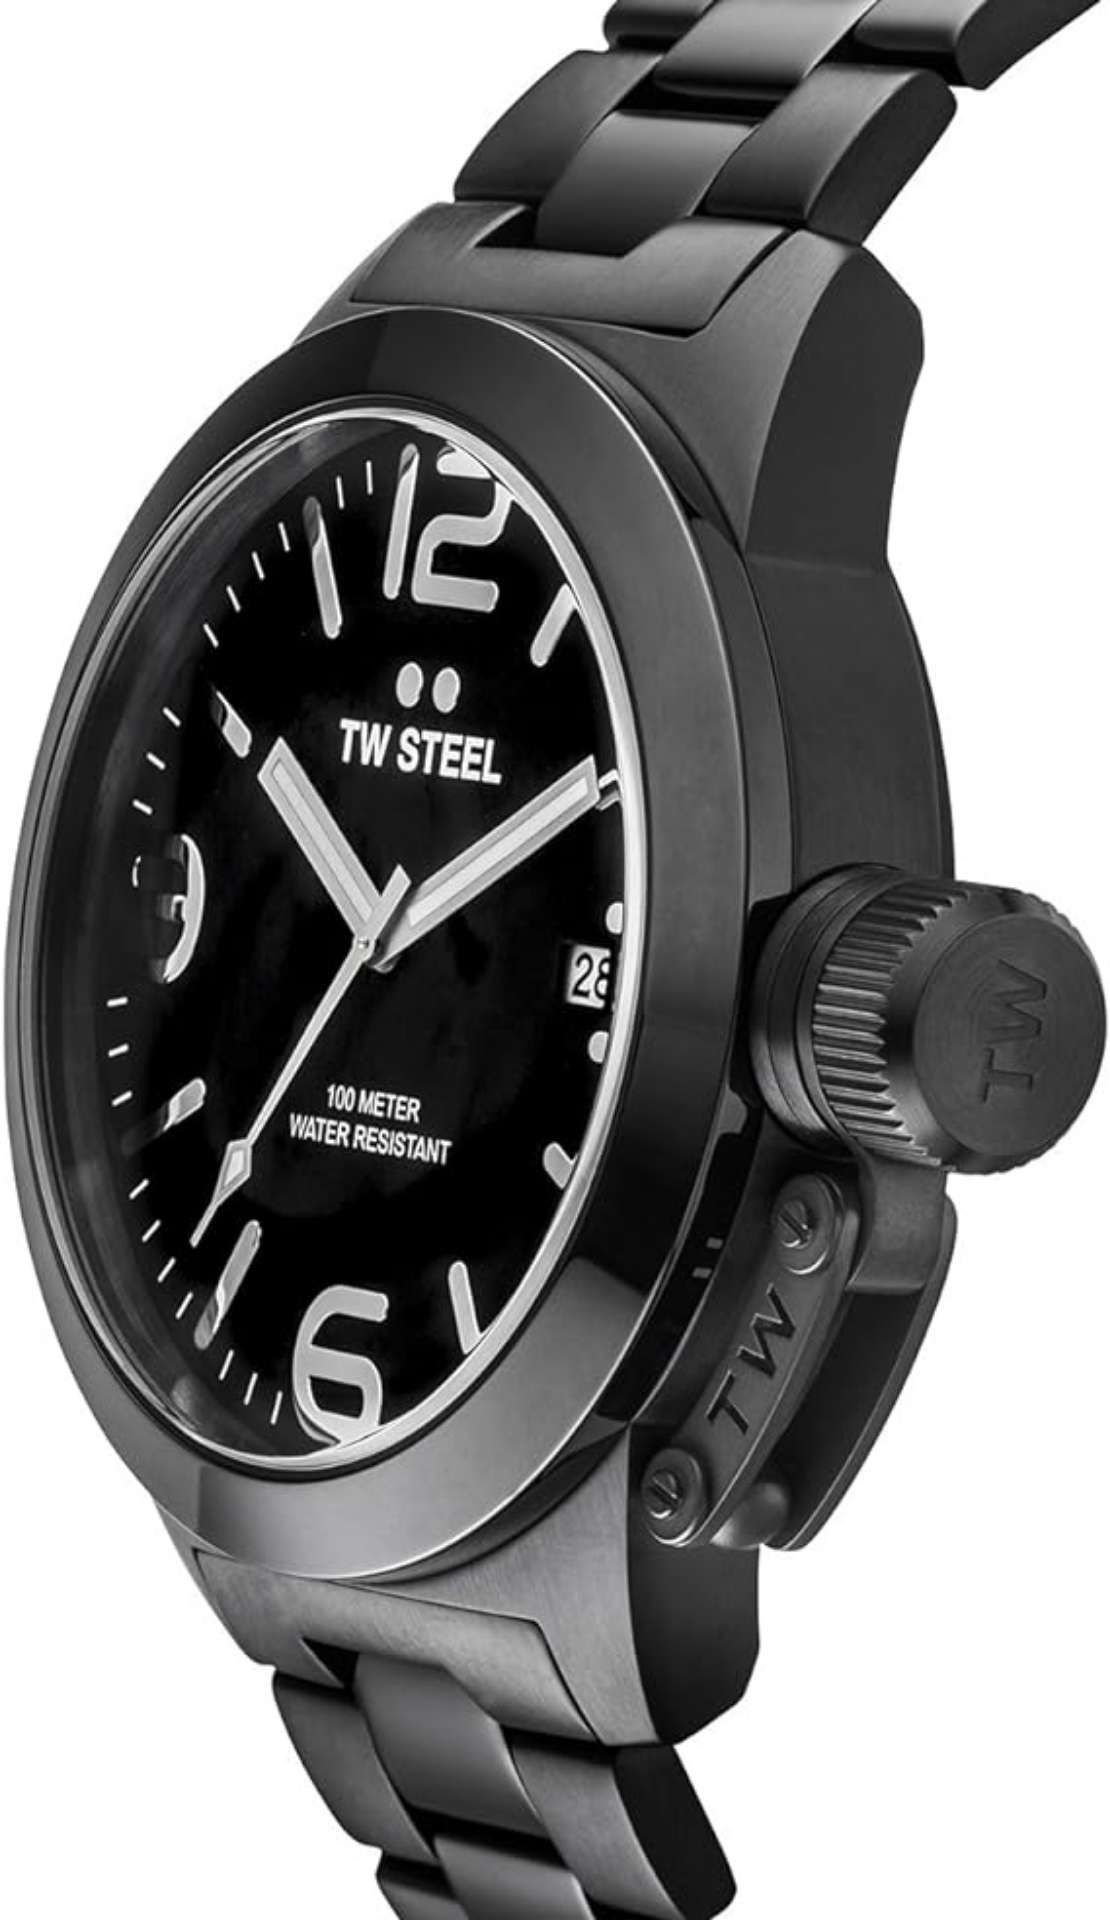 Brand NewTW Steel Men's Quartz Watch with Black Dial Analogue Display and Black Stainless Steel - Image 2 of 5